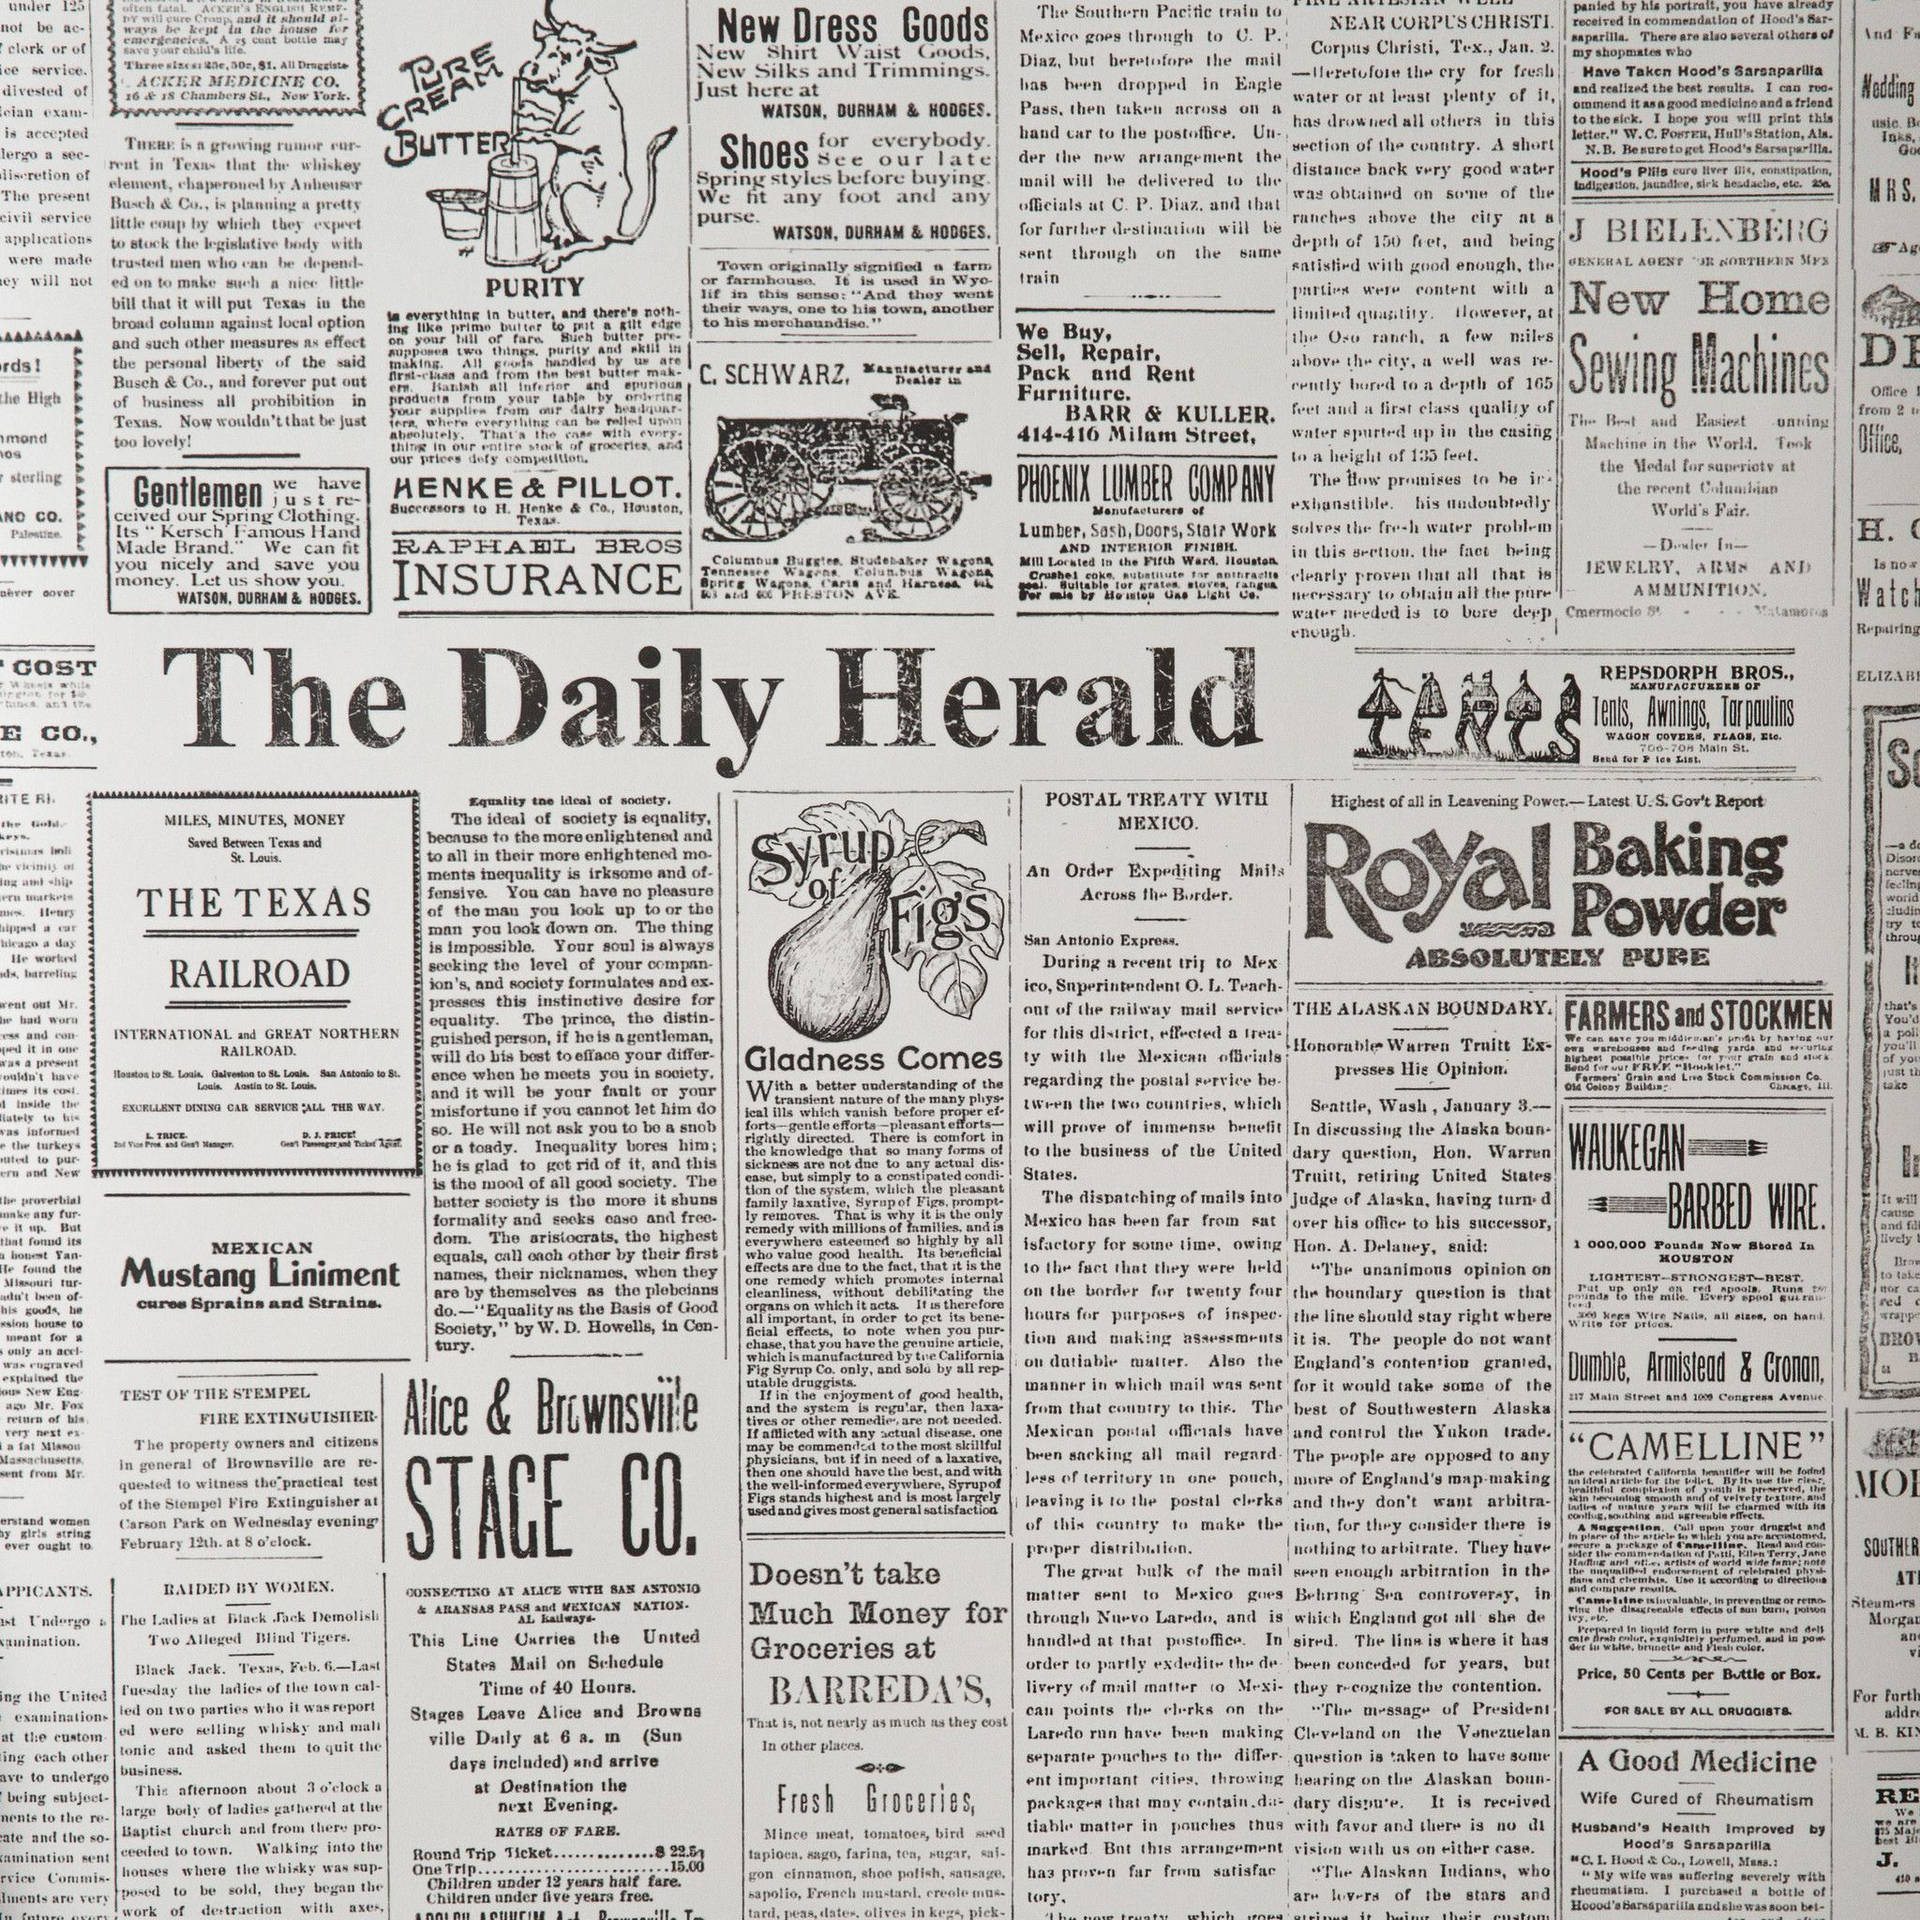 Newspaper Aesthetic The Daily Herald Background